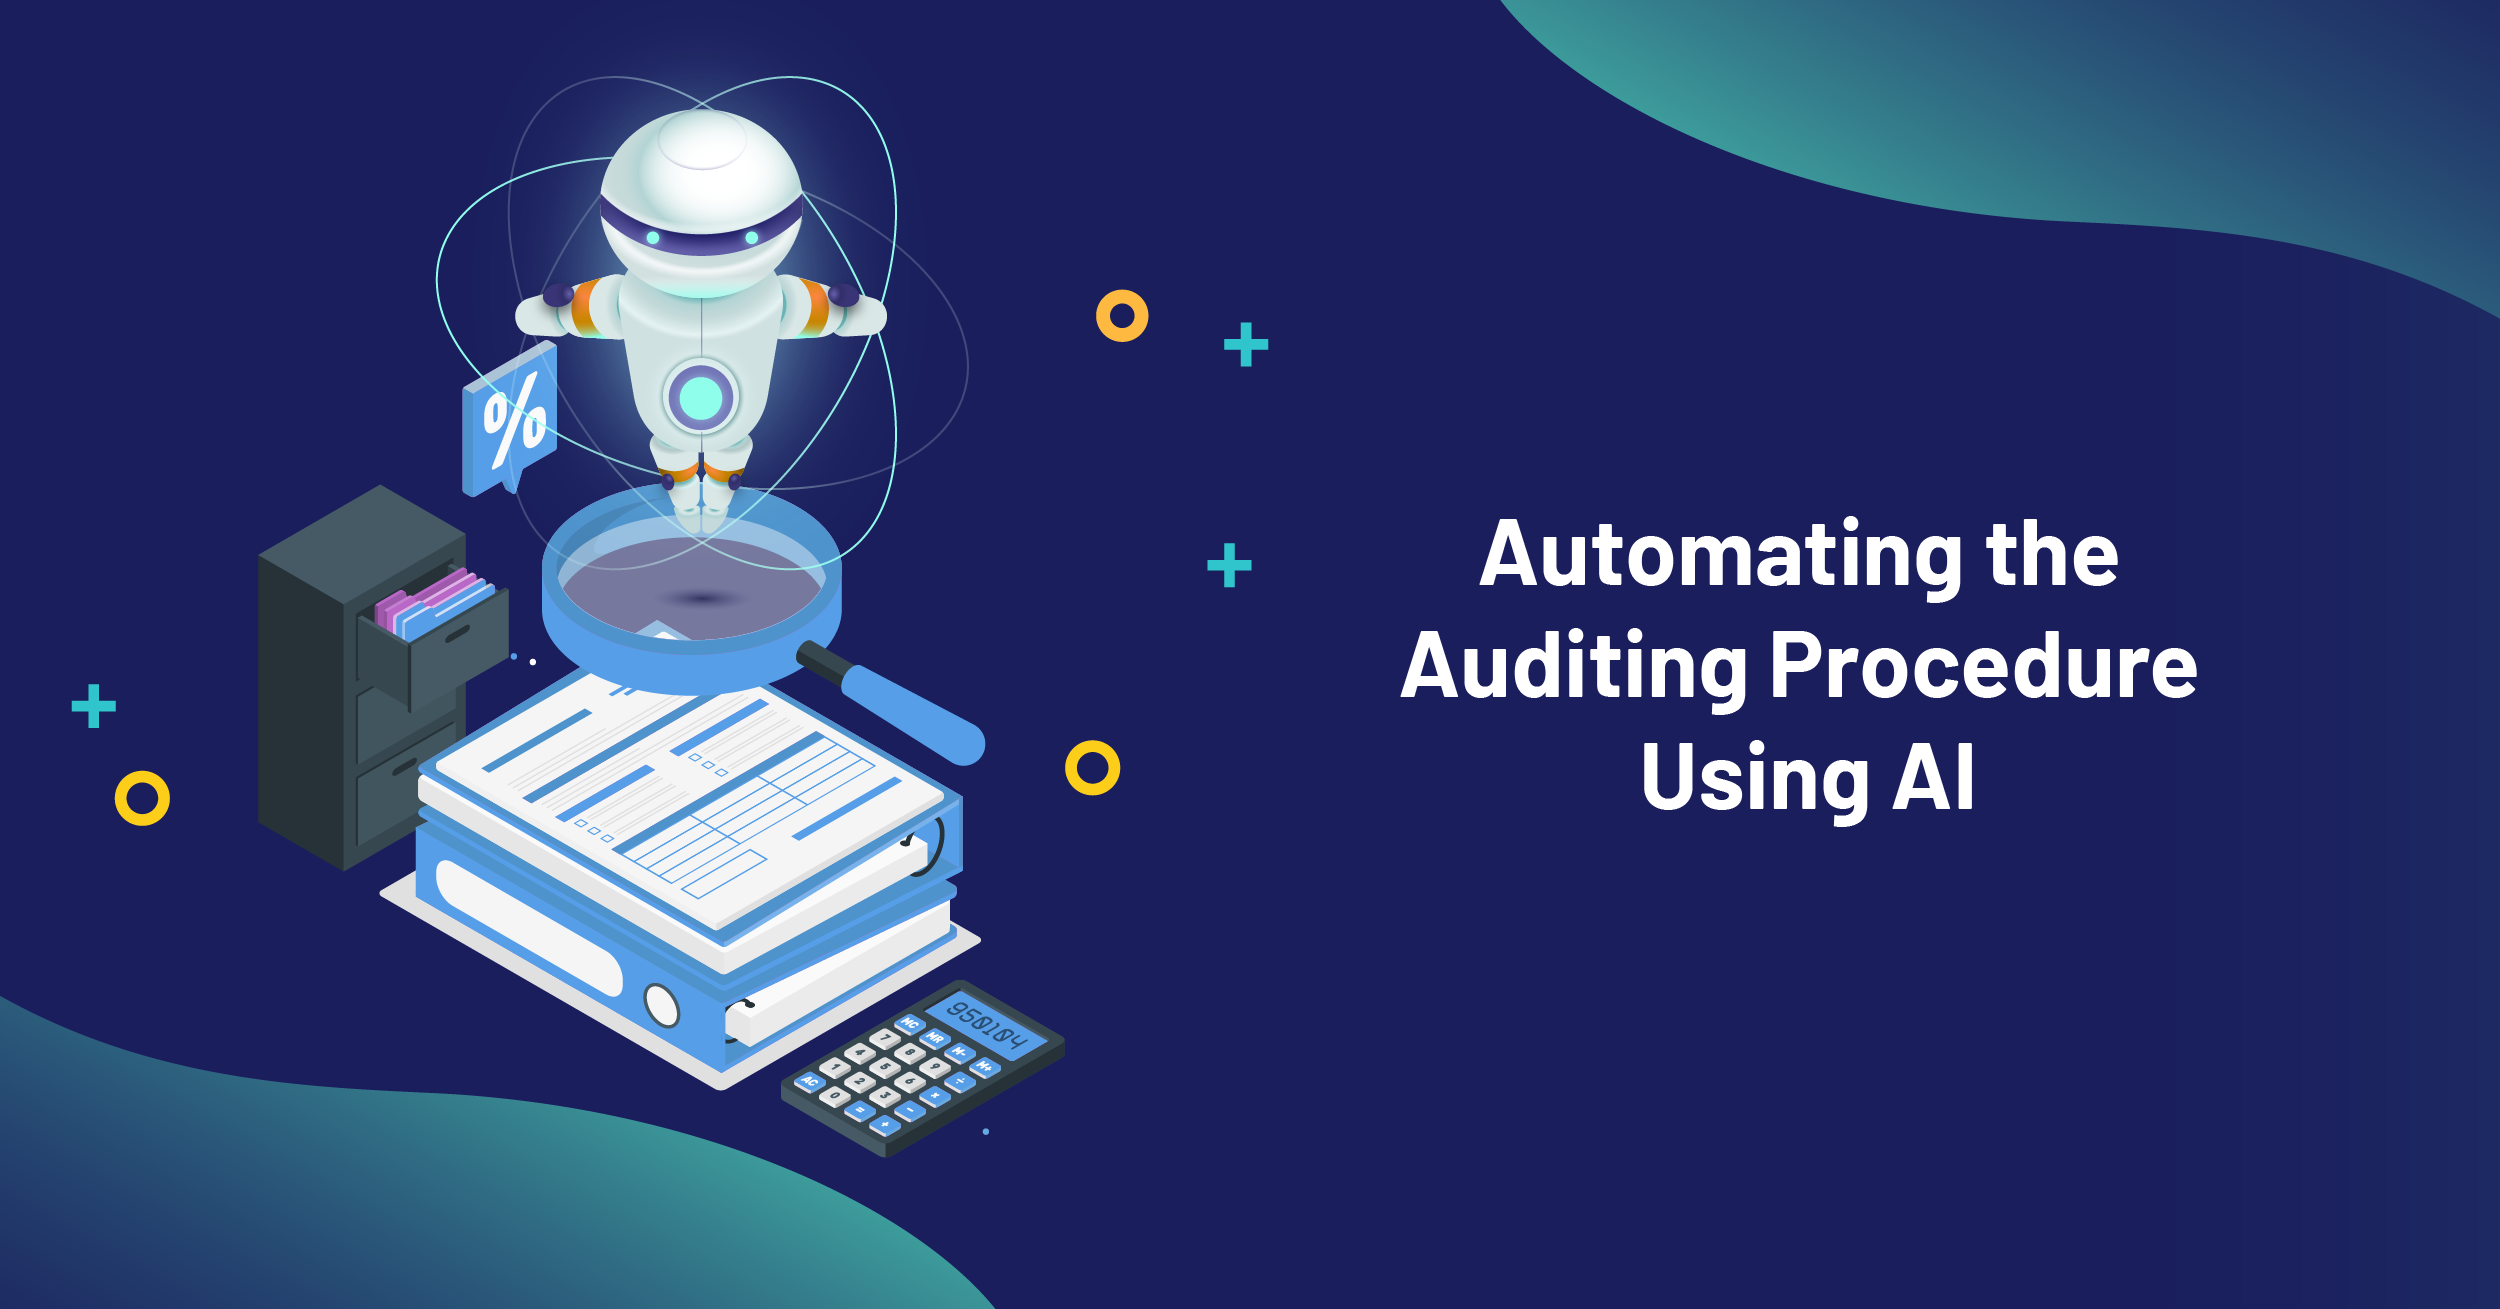 Automating the Auditing Procedure Using AI